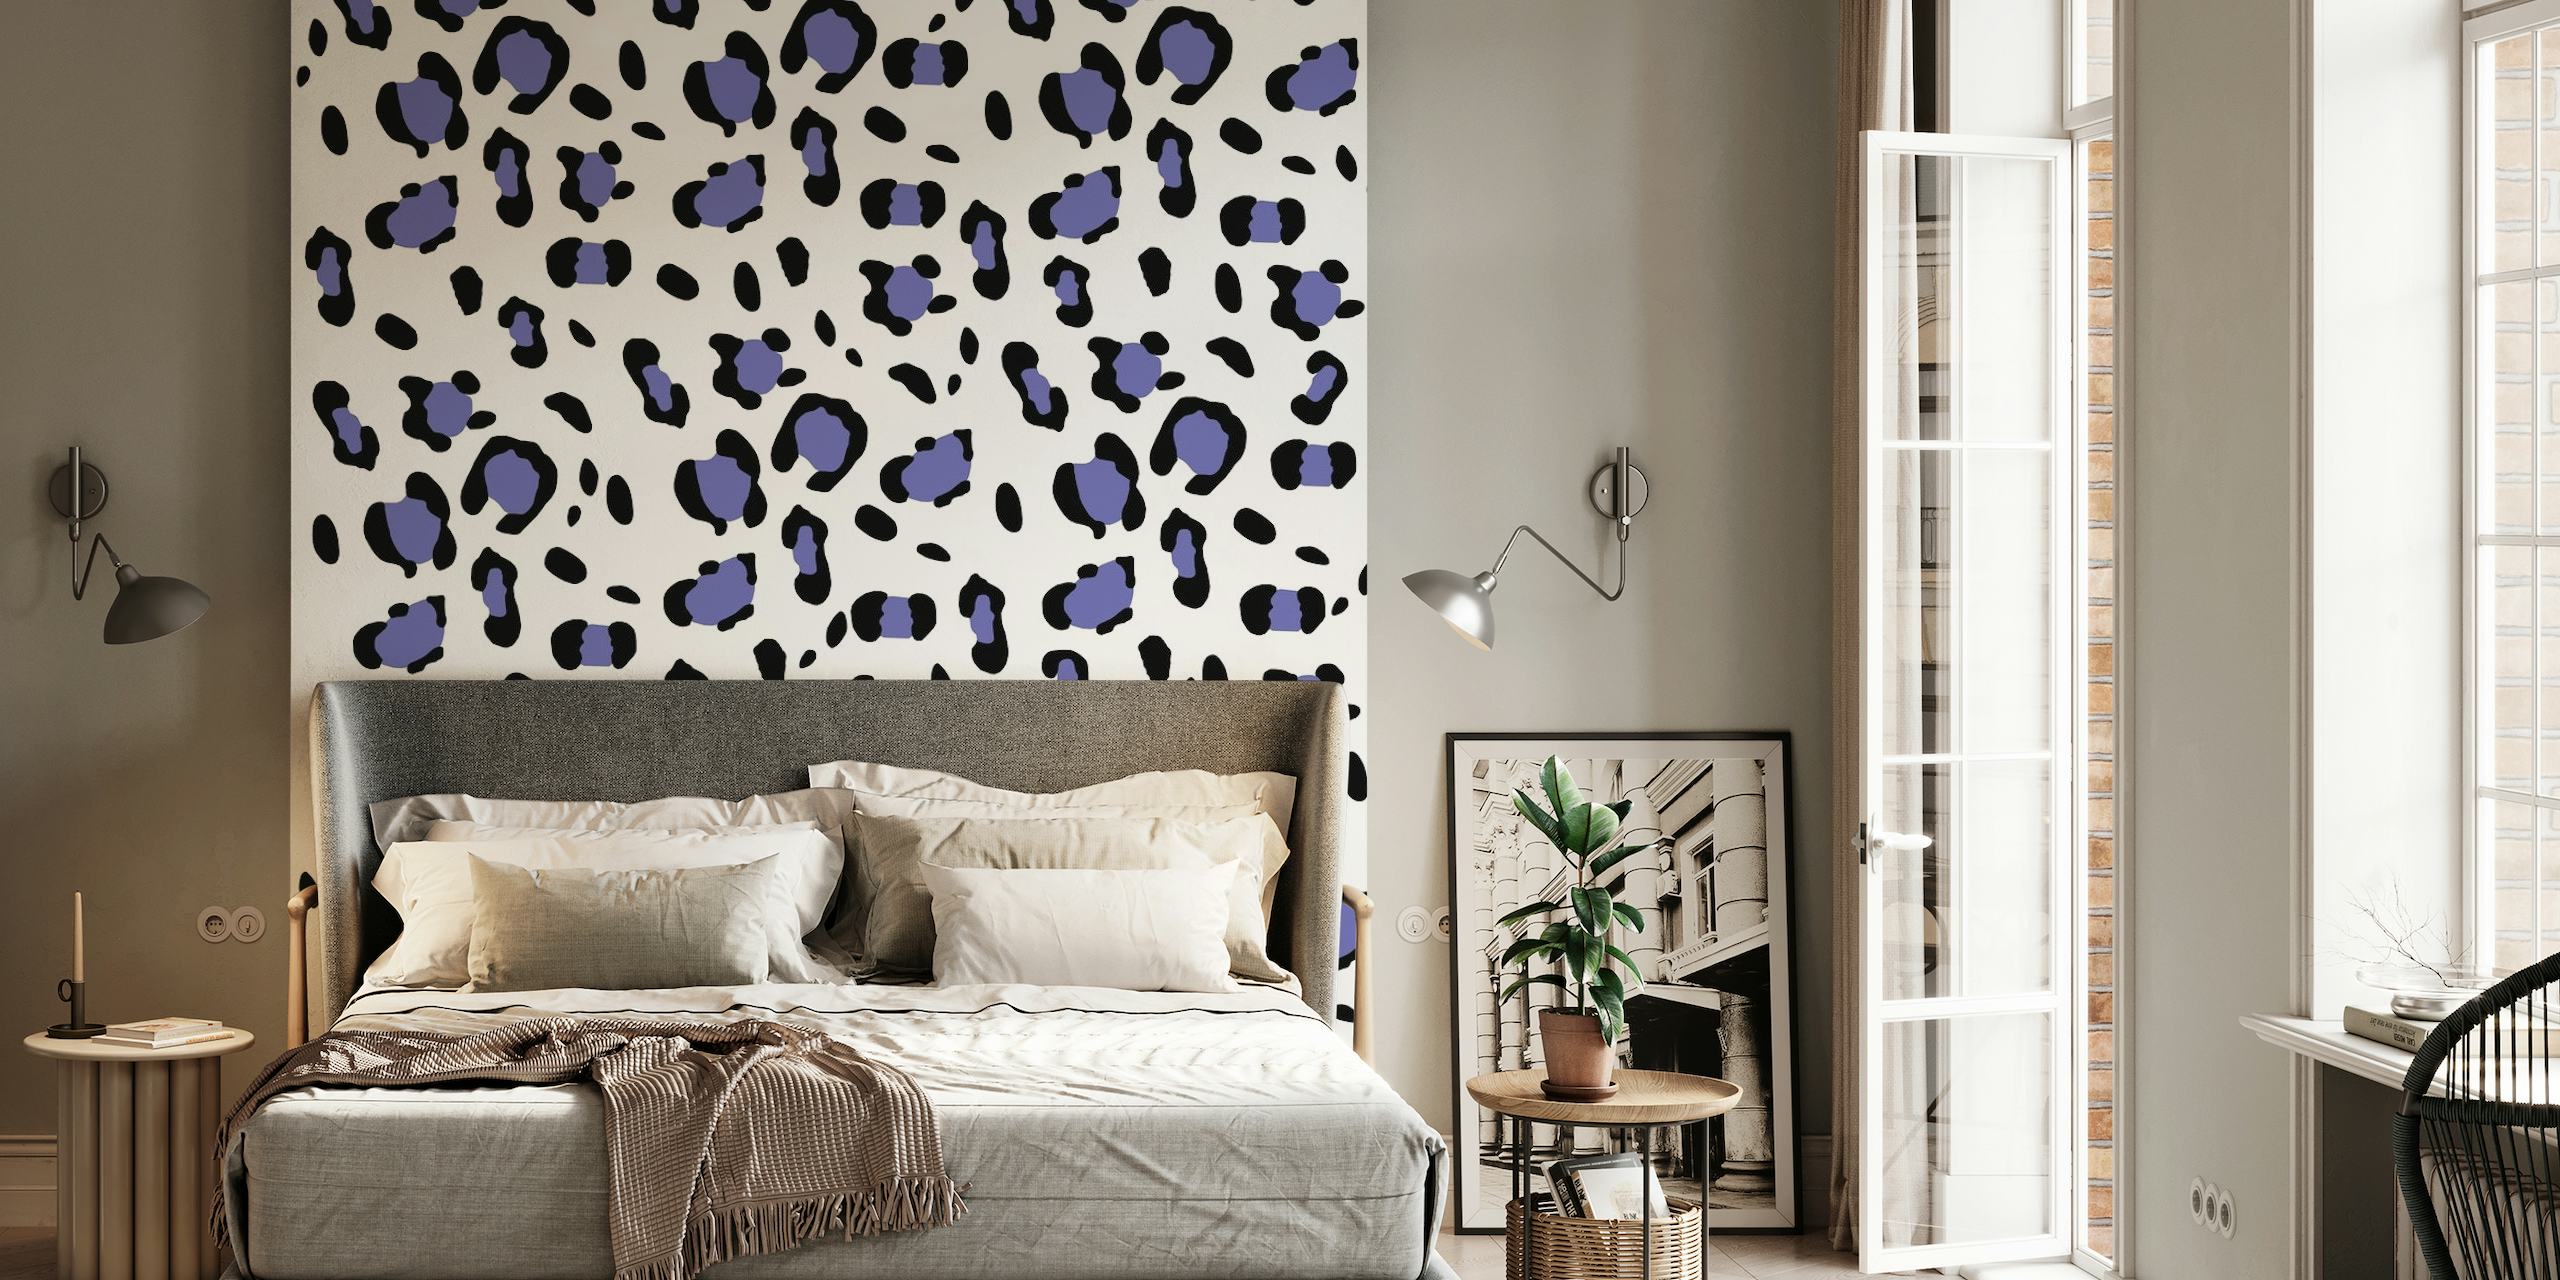 Blue and black leopard print pattern on a white background wall mural